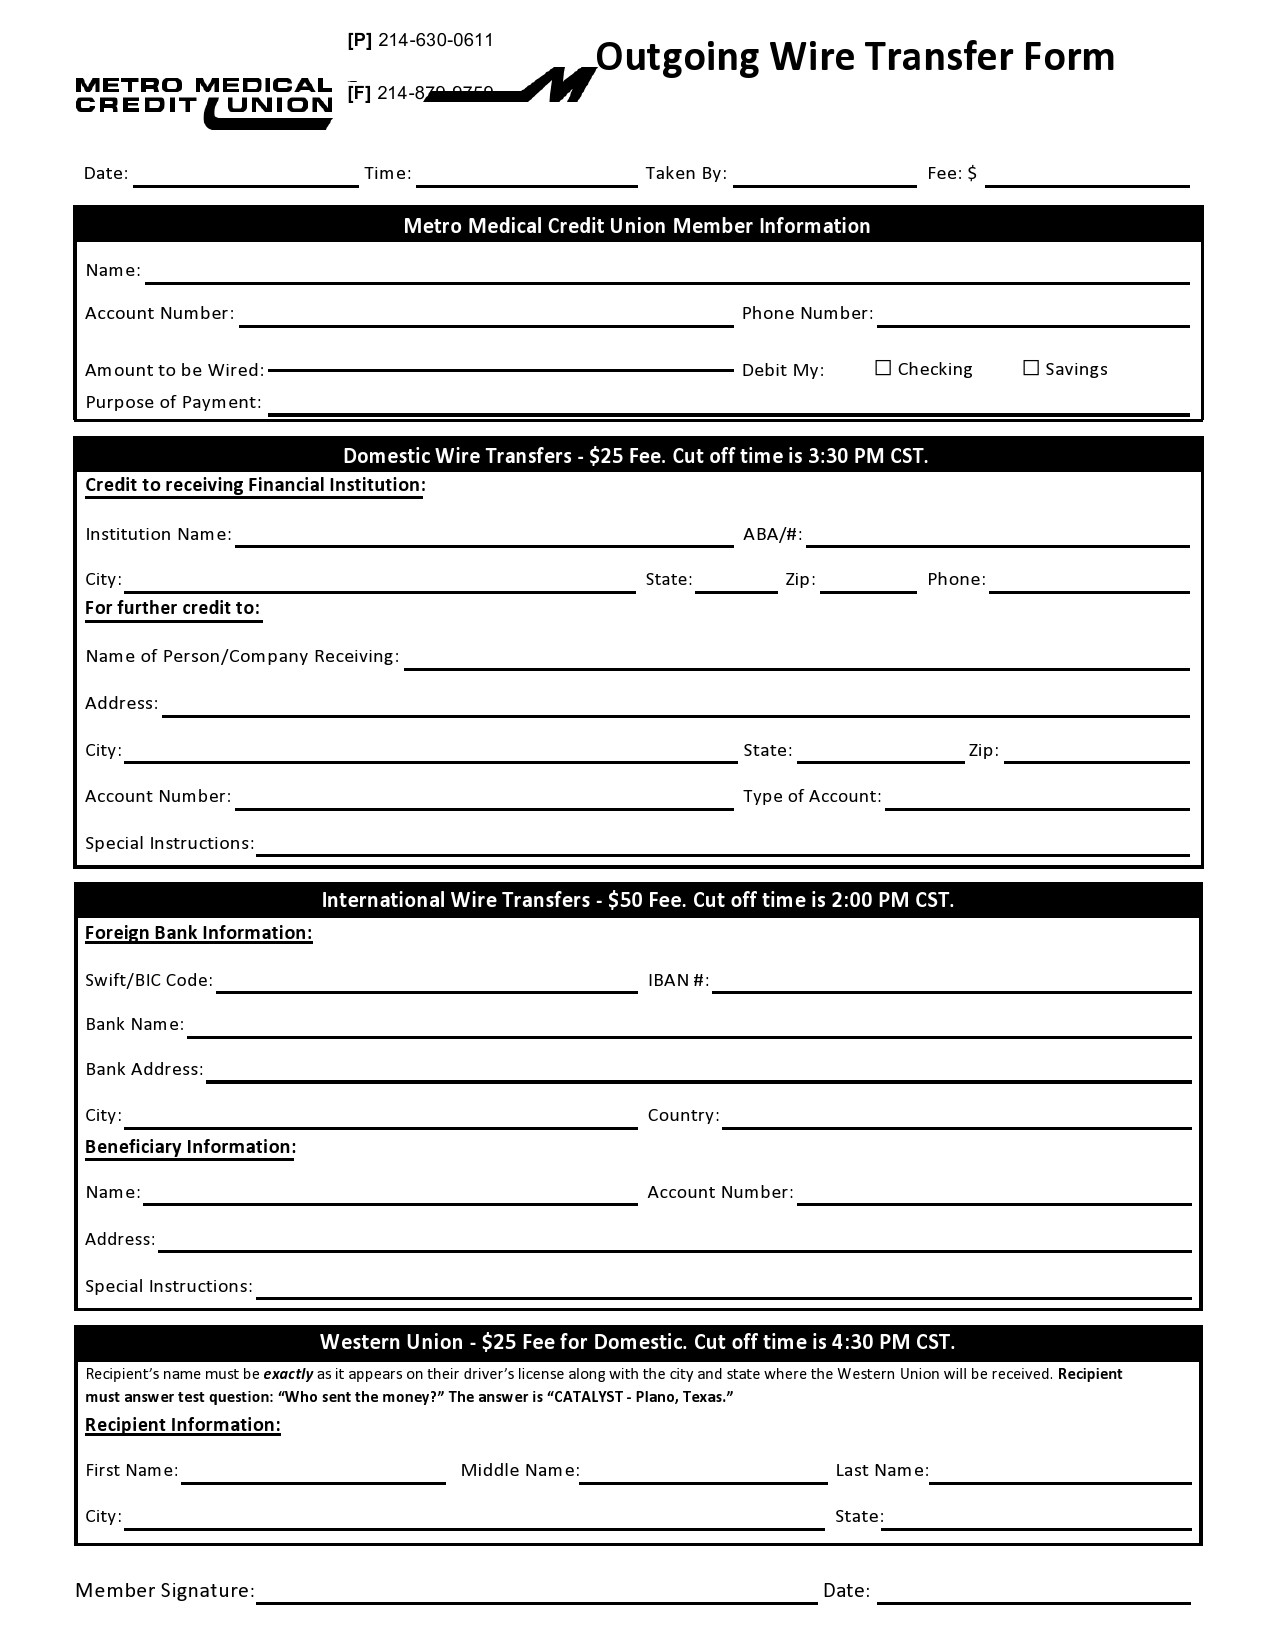 Free wire transfer form 24